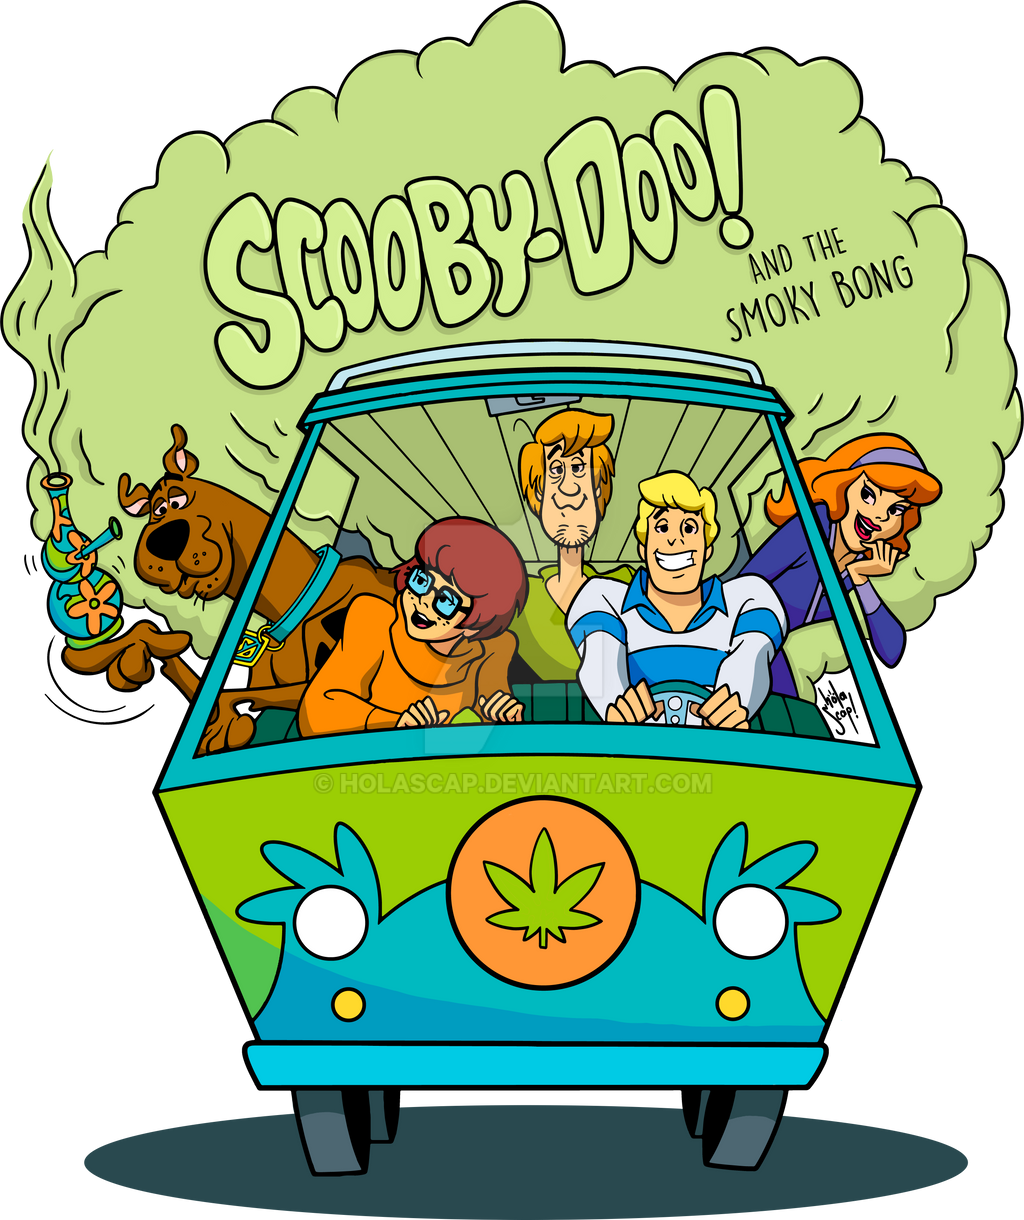 Scooby Doo and the Smoky bong by HOLASCAP on DeviantArt